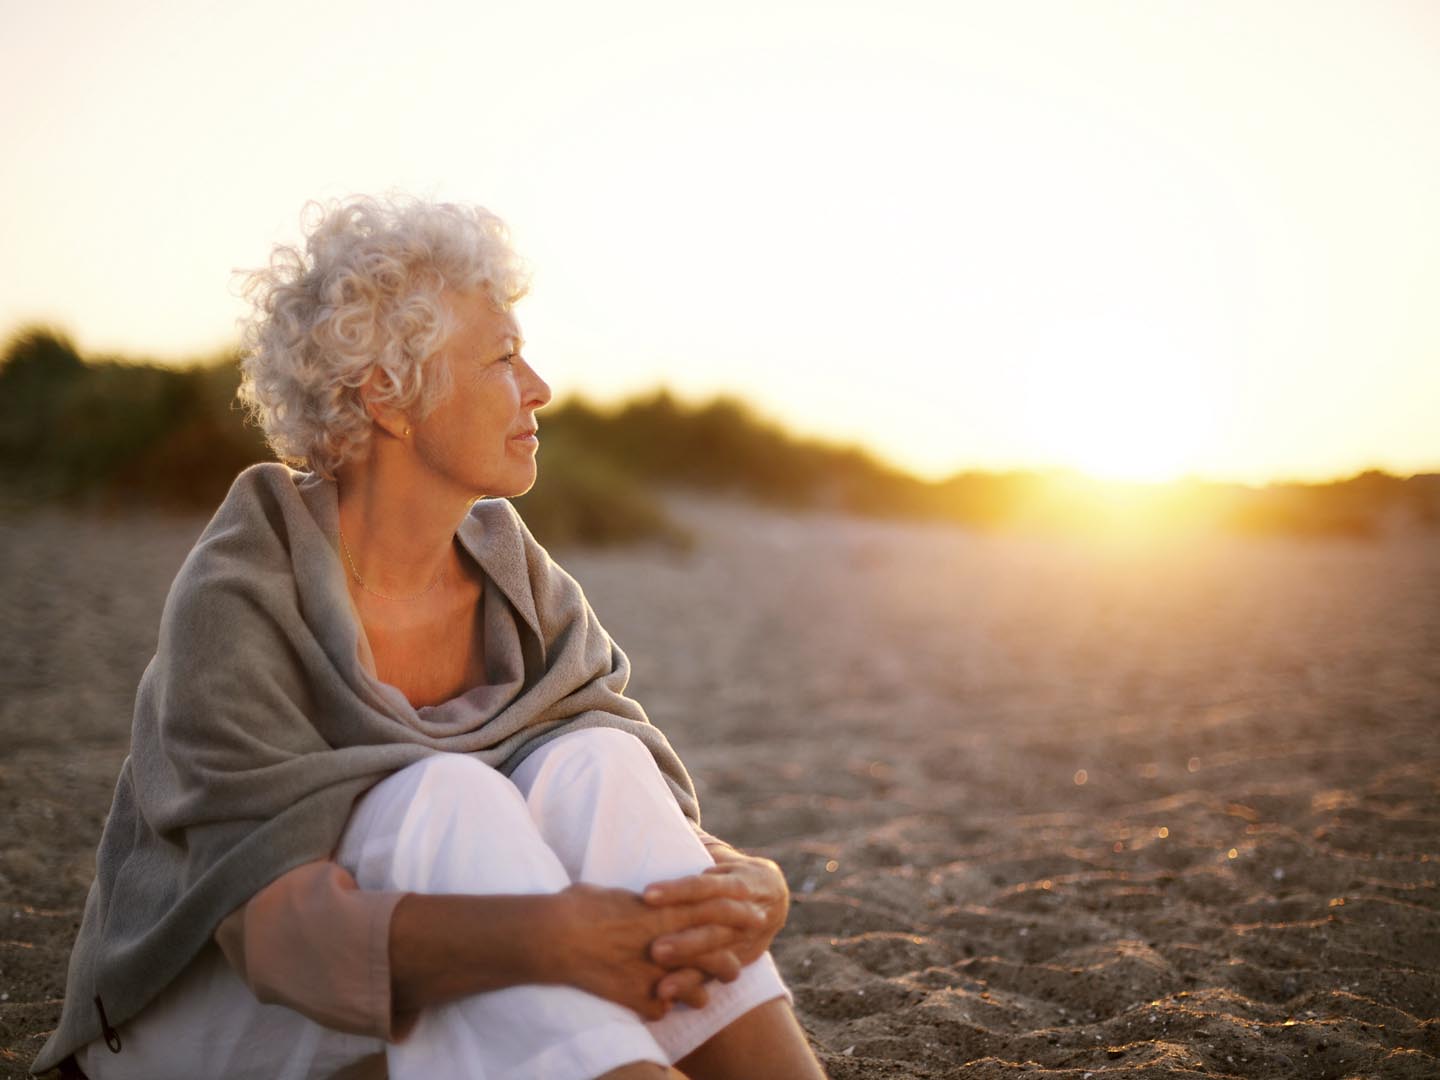 Old woman sitting on the beach looking away at copyspace. Senior female sitting outdoors